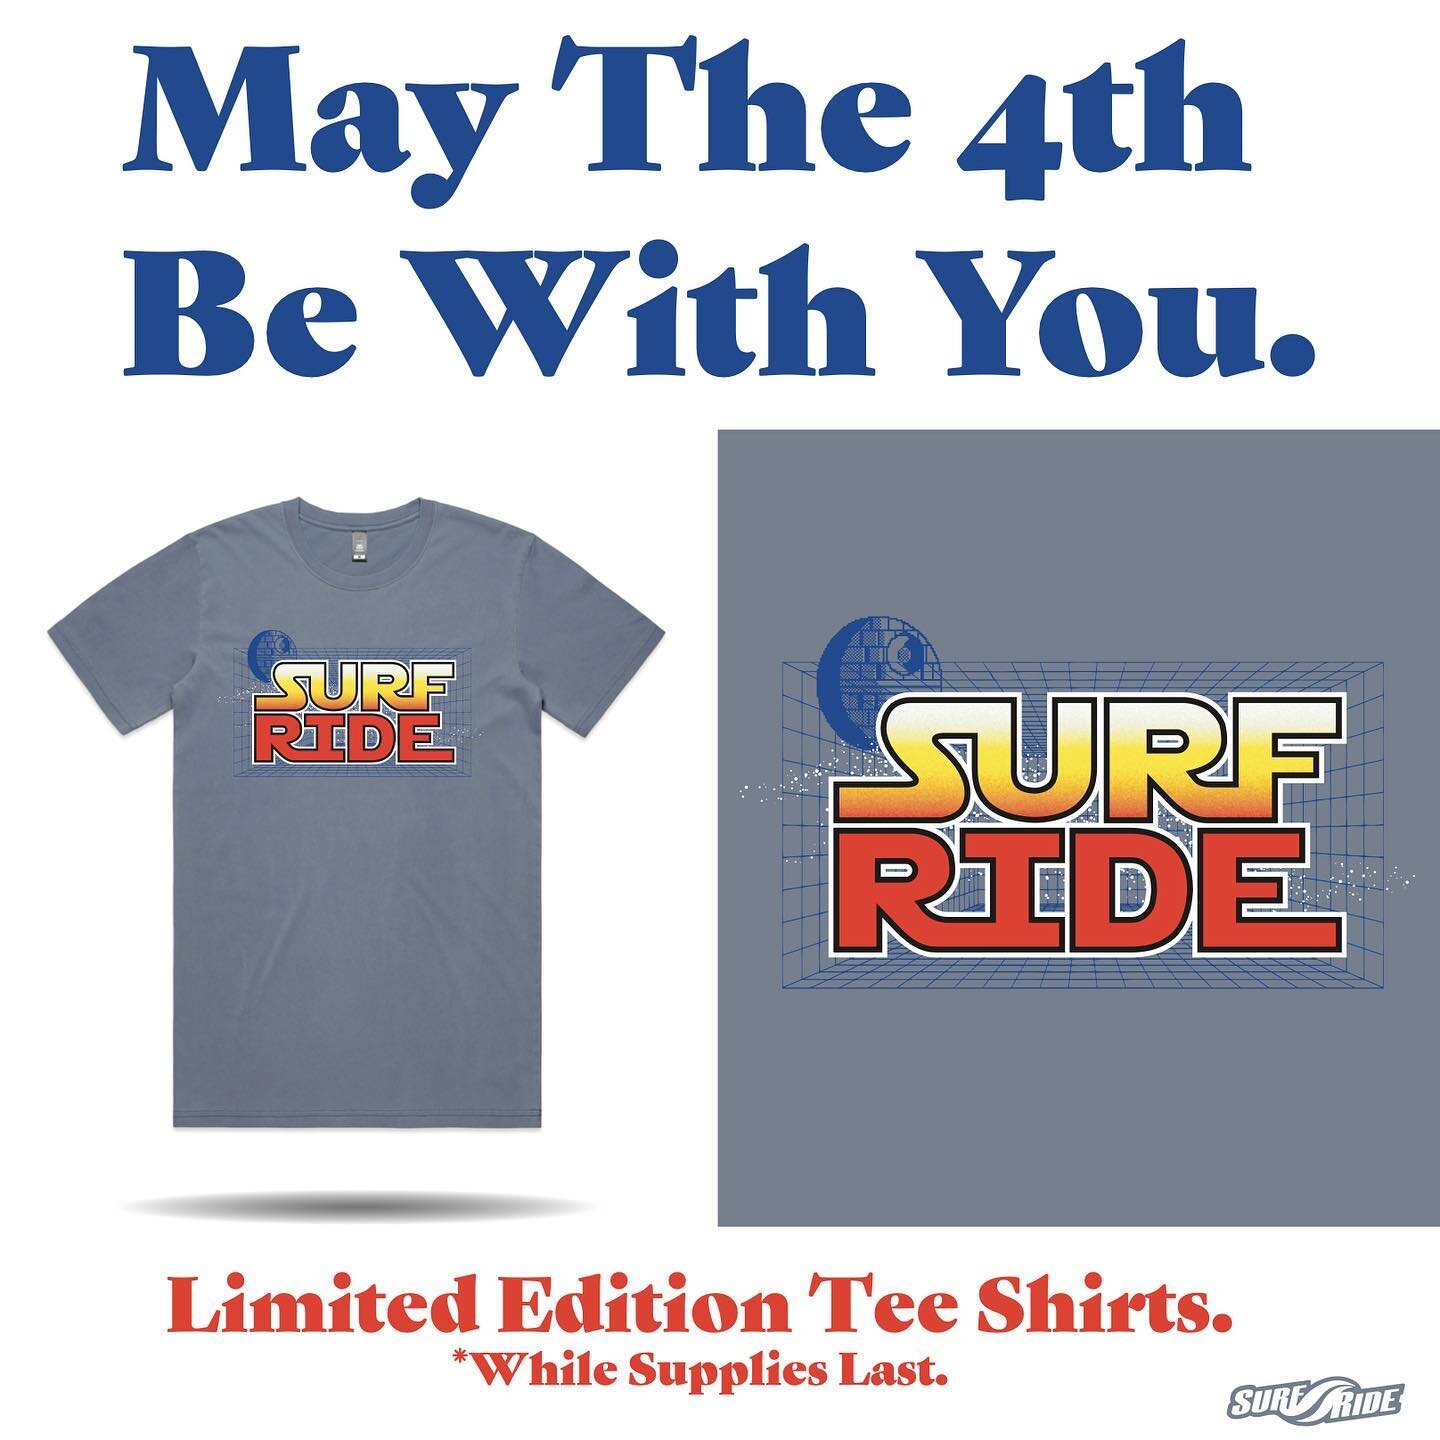 May The 4th Be With You!! 
Limited Edition tees available online and in stores, but hurry because these won&rsquo;t last long!! It&rsquo;s our favorite day of the year and our new favorite design for the day! May The 4th Be With You LIMITED EDITION p